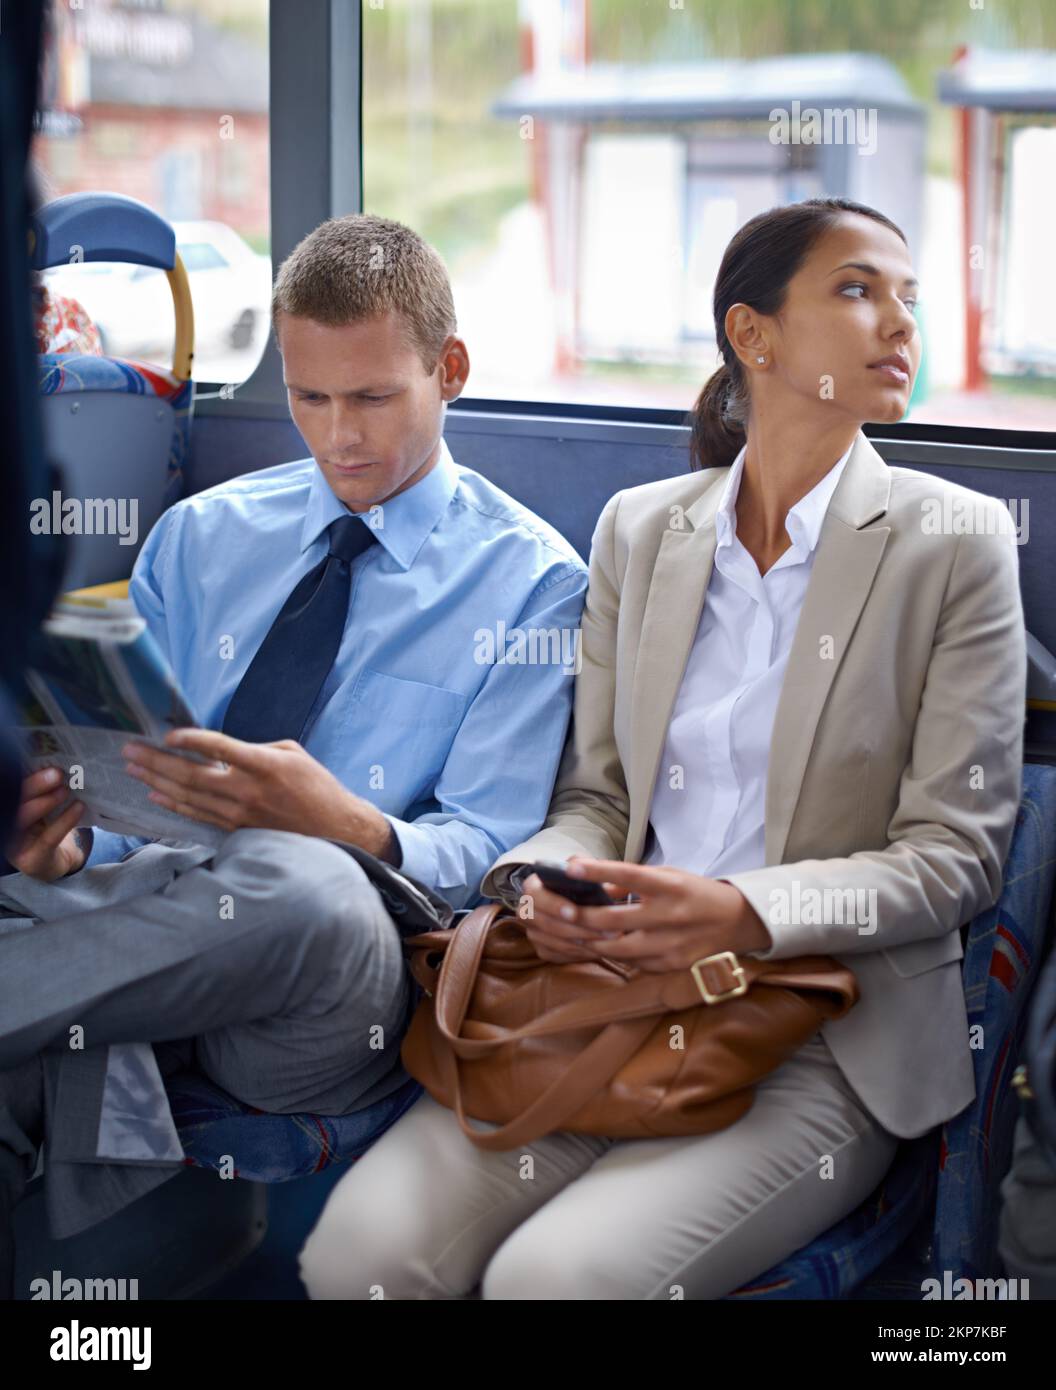 On the way to work. Two young colleagues traveling on the bus together. Stock Photo